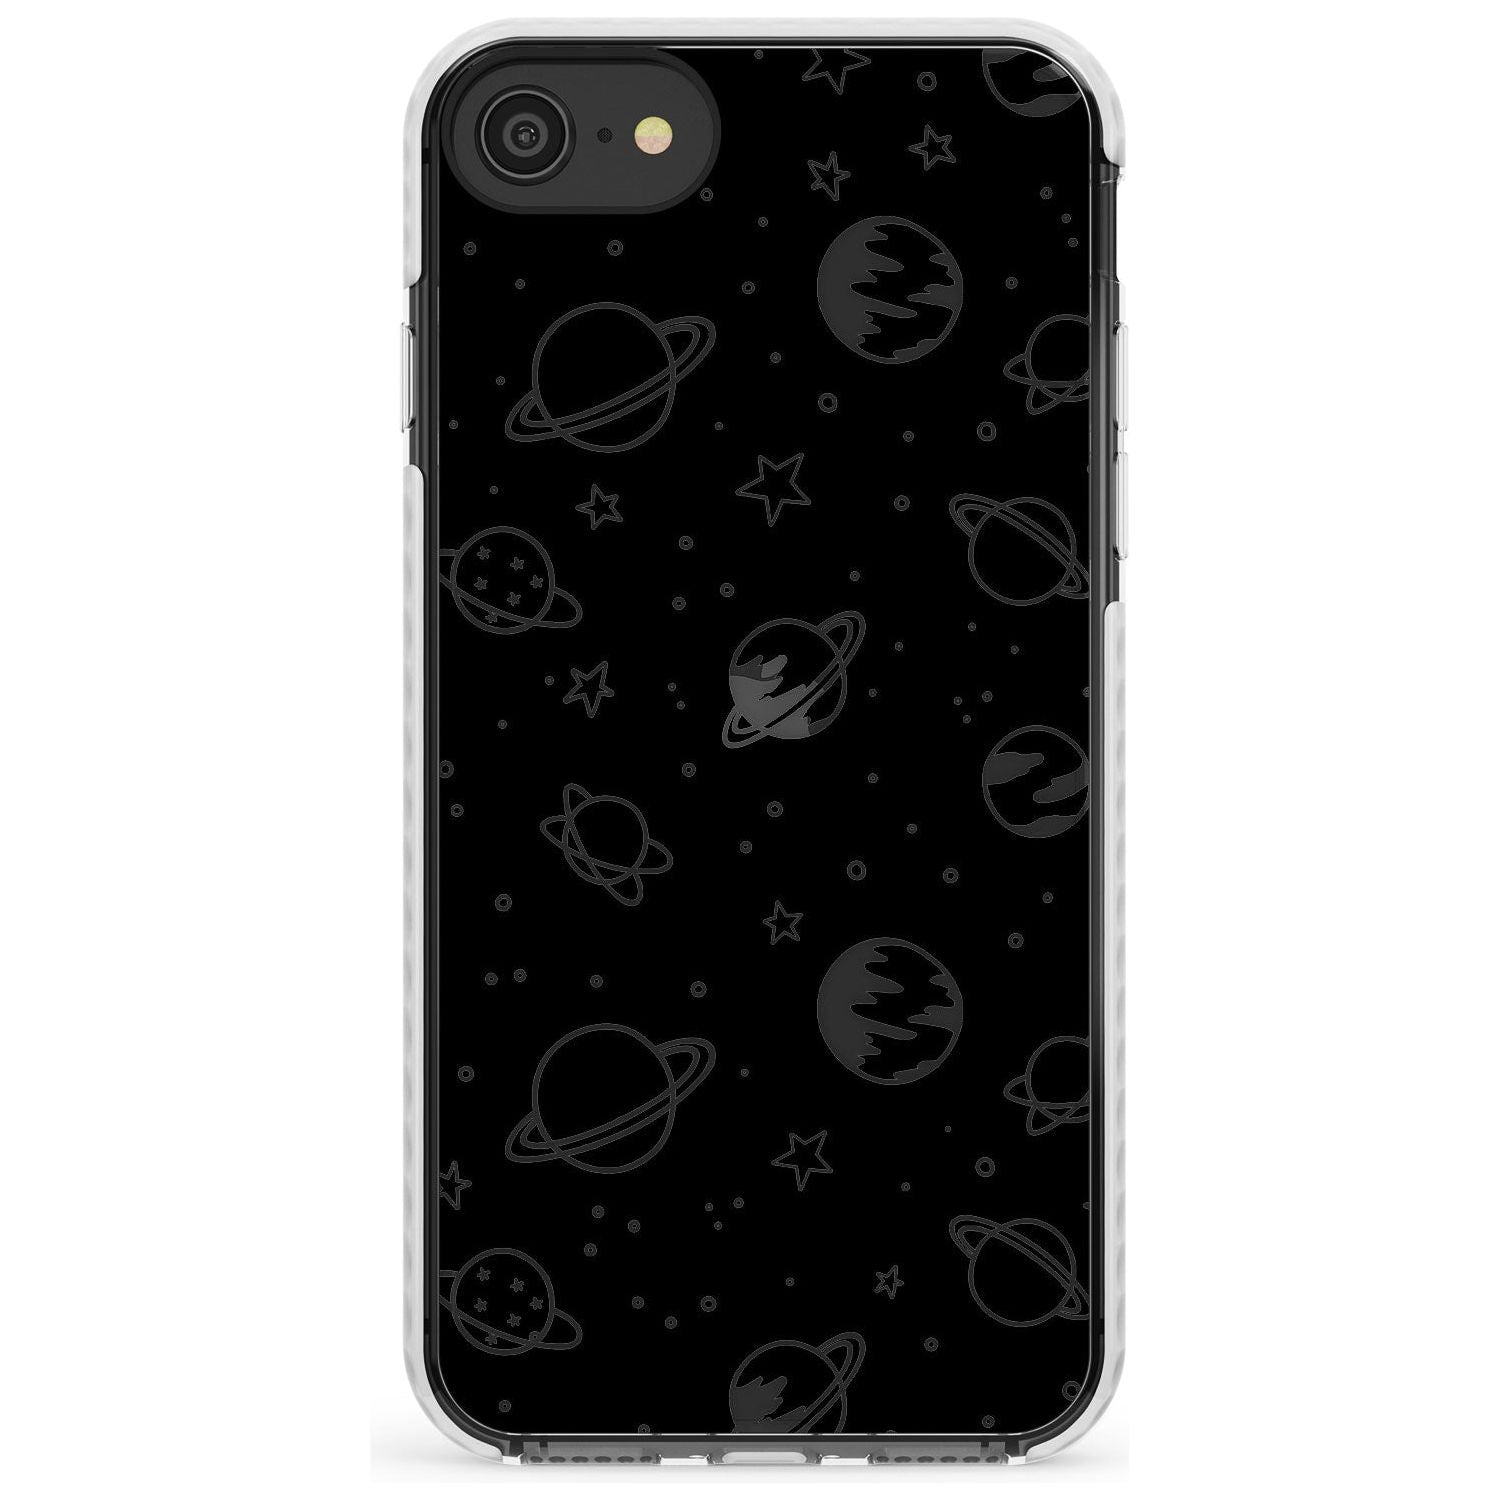 Outer Space Outlines: Clear on Black Slim TPU Phone Case for iPhone SE 8 7 Plus